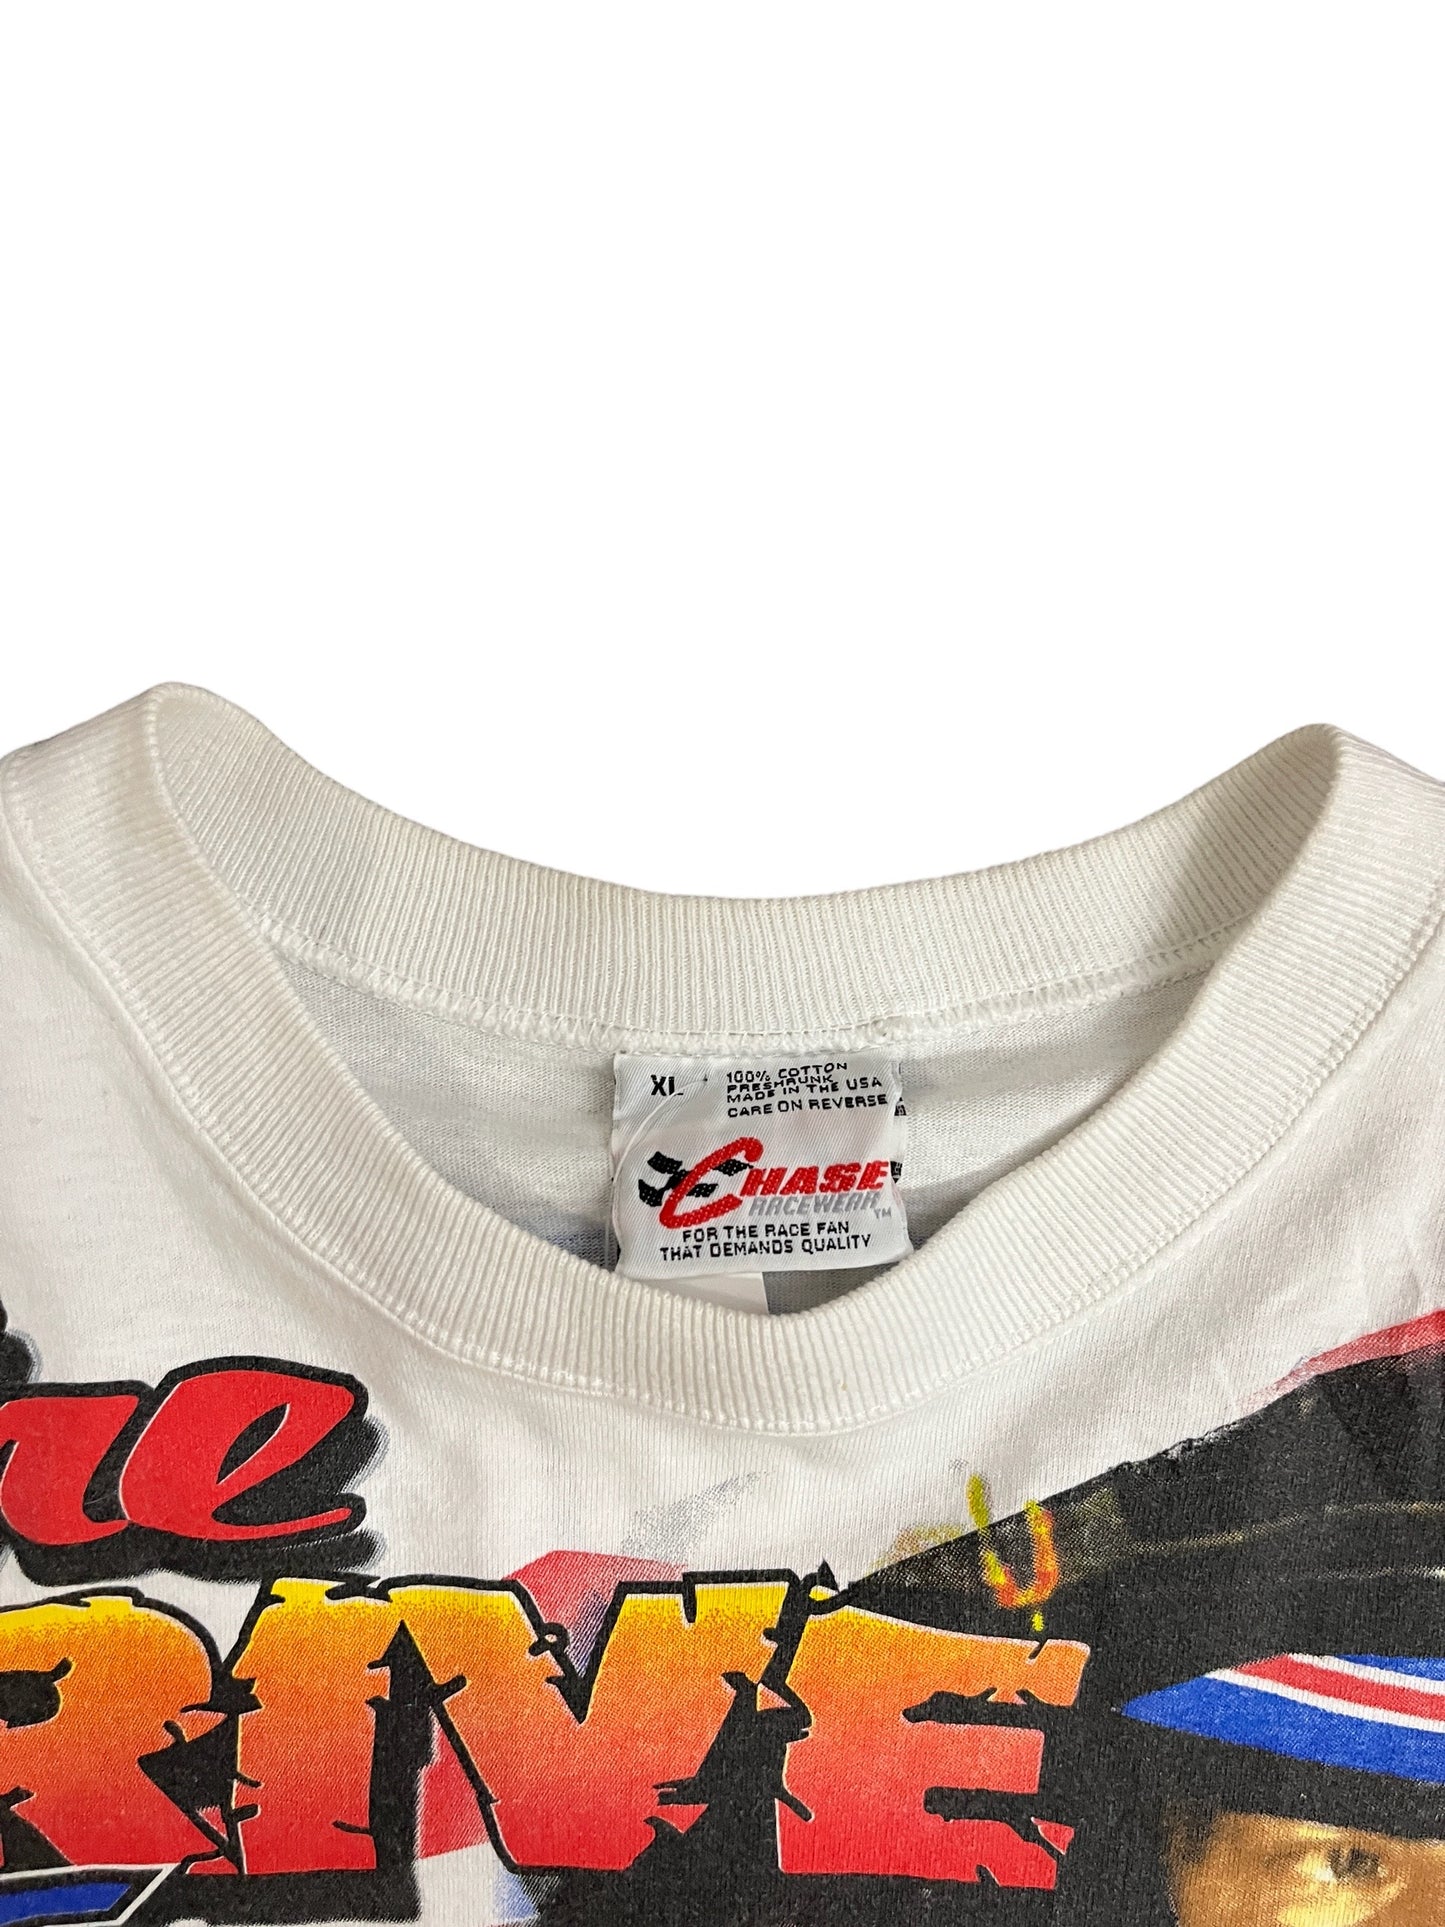 Vintage Nascar The Drive For Excellence "Robert Yates" AOP Tee